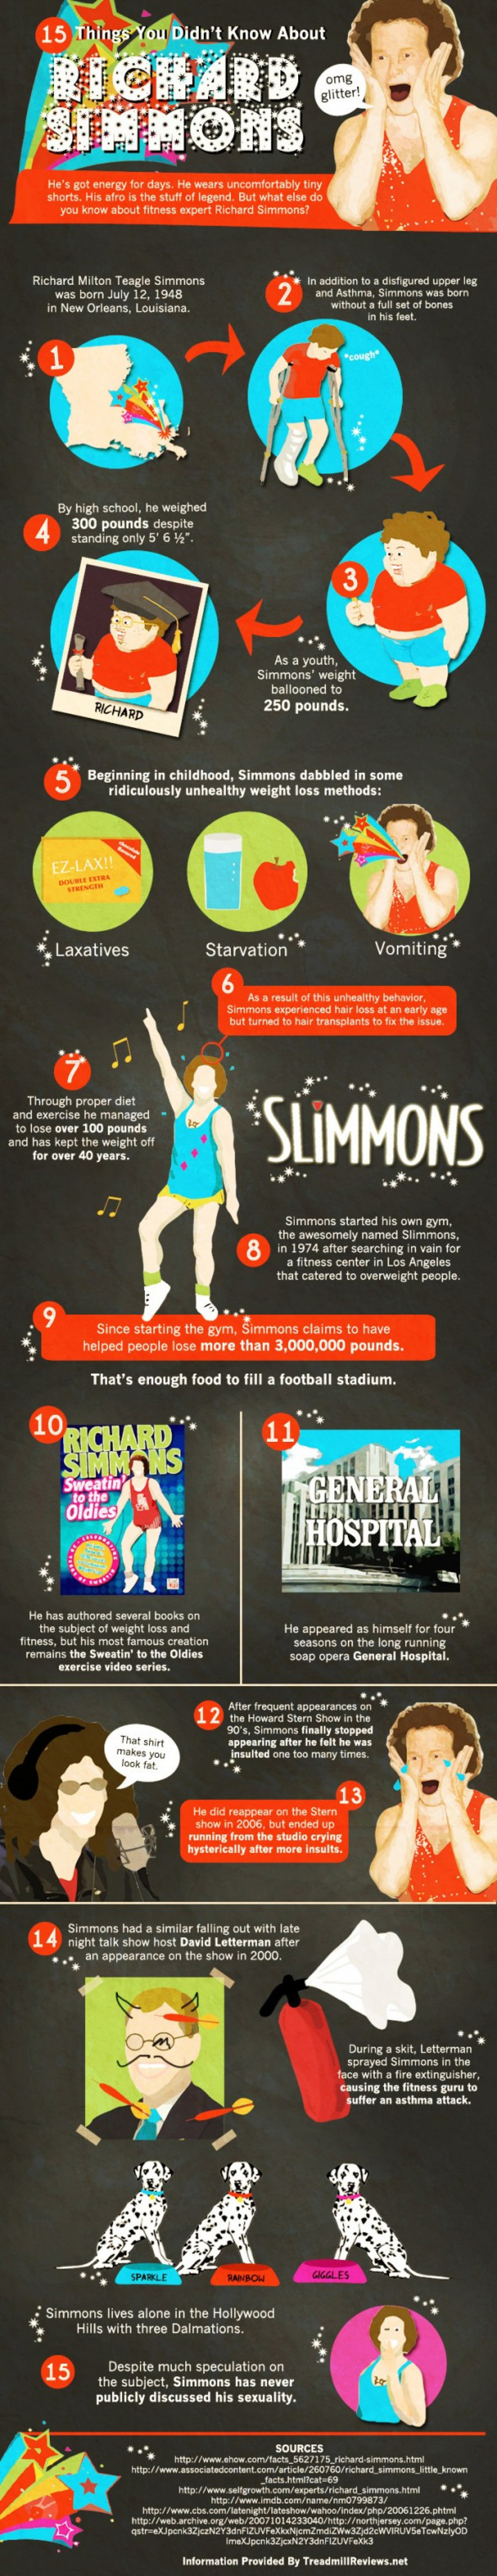 15-things-you-didnt-know-about-richard-simmons_50290a8656120_w1500